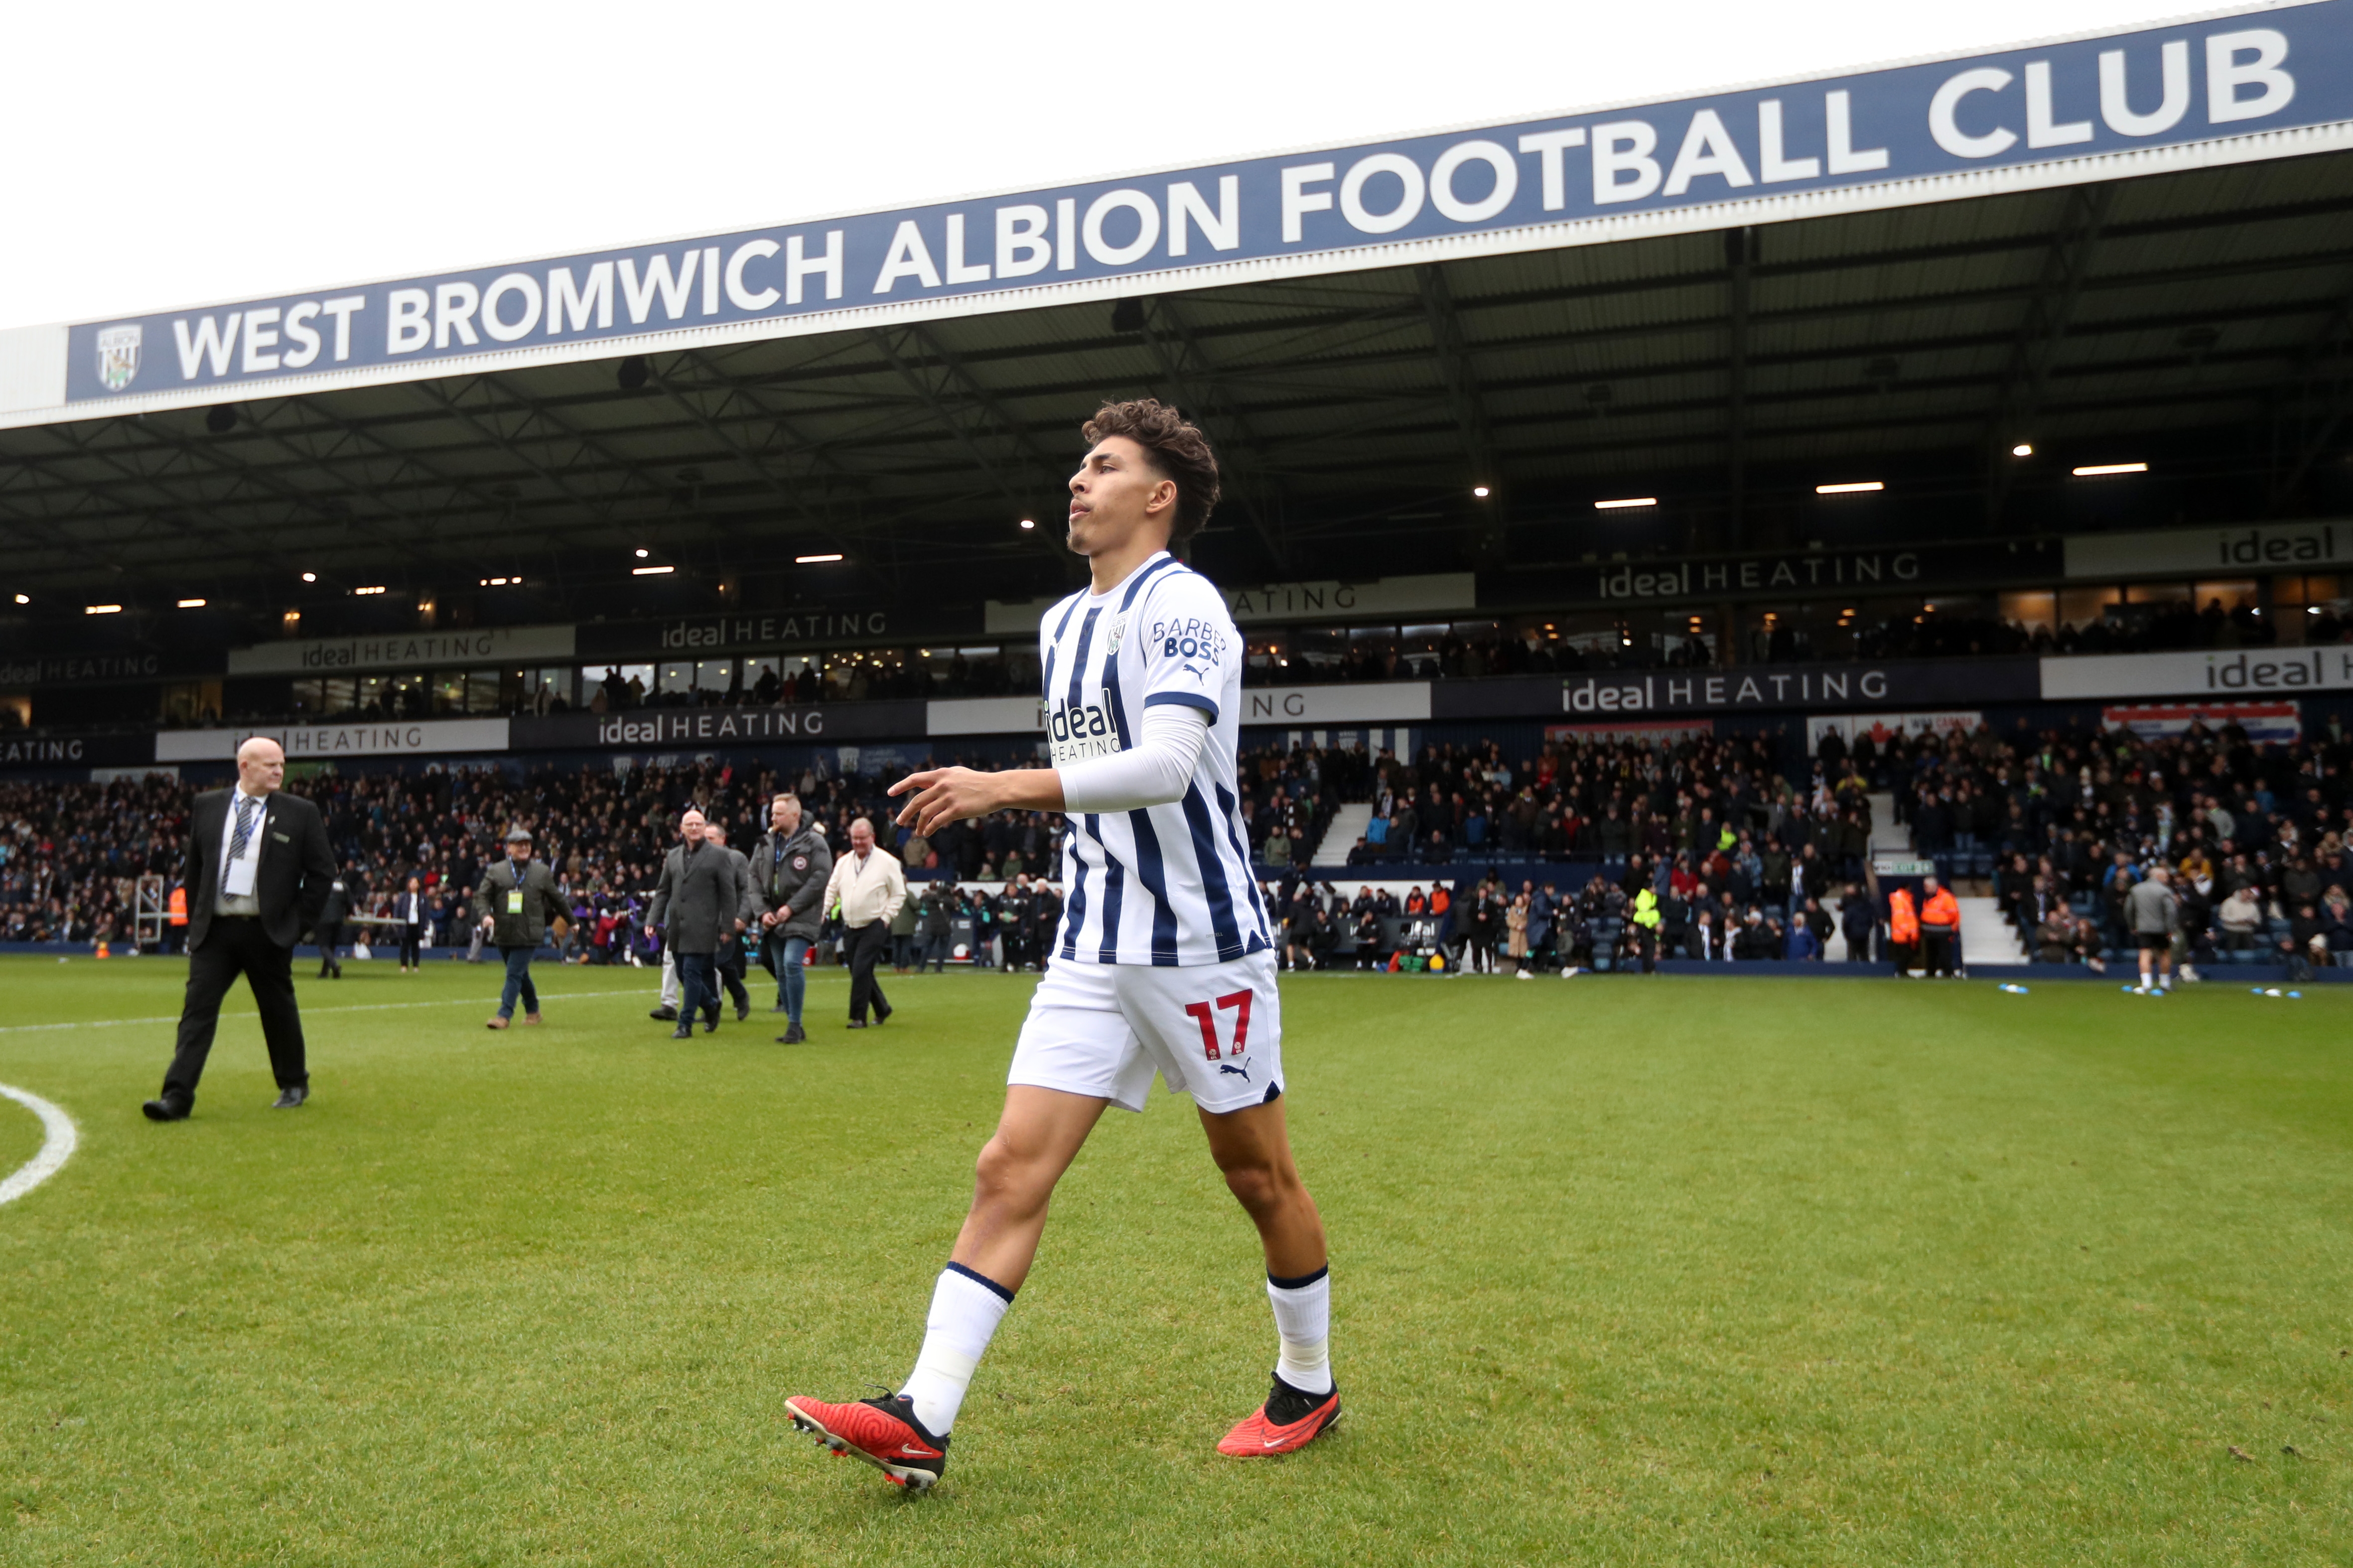 Jeremy Sarmiento on the pitch at The Hawthorns ahead of kick-off against Stoke